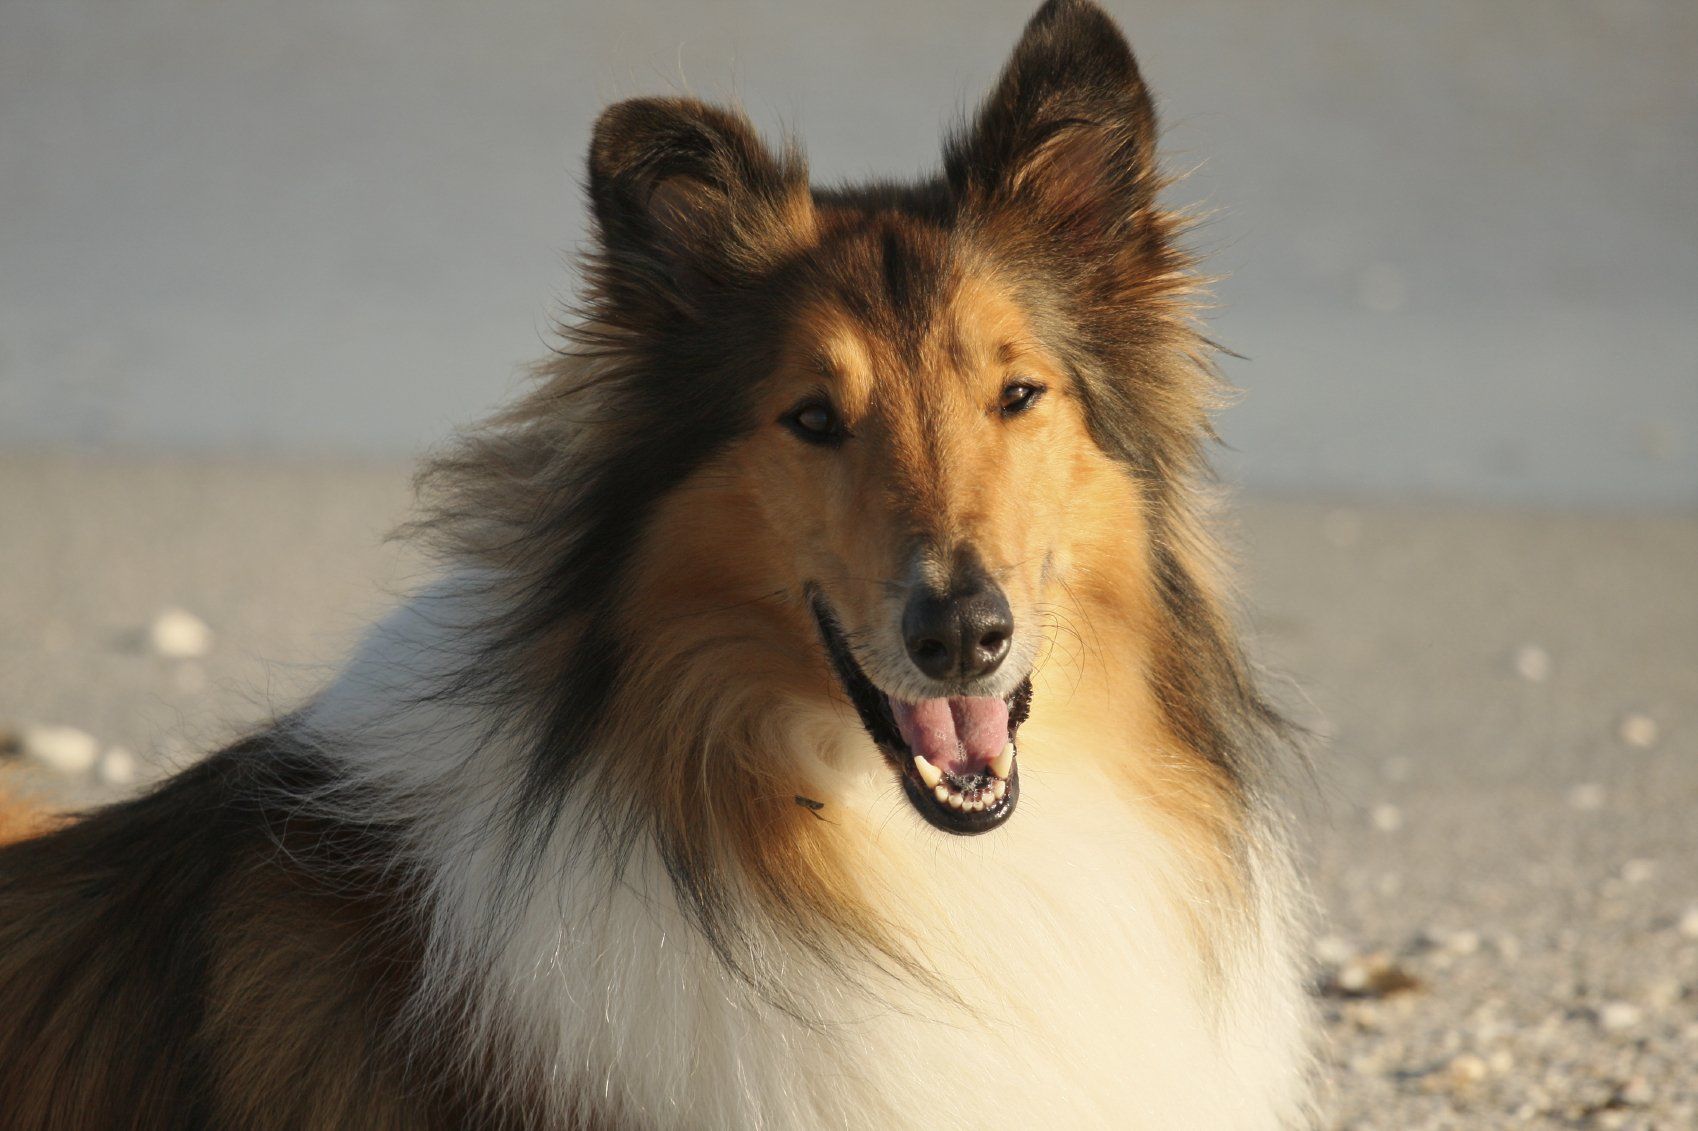 Lassie' makes a welcome return to movies